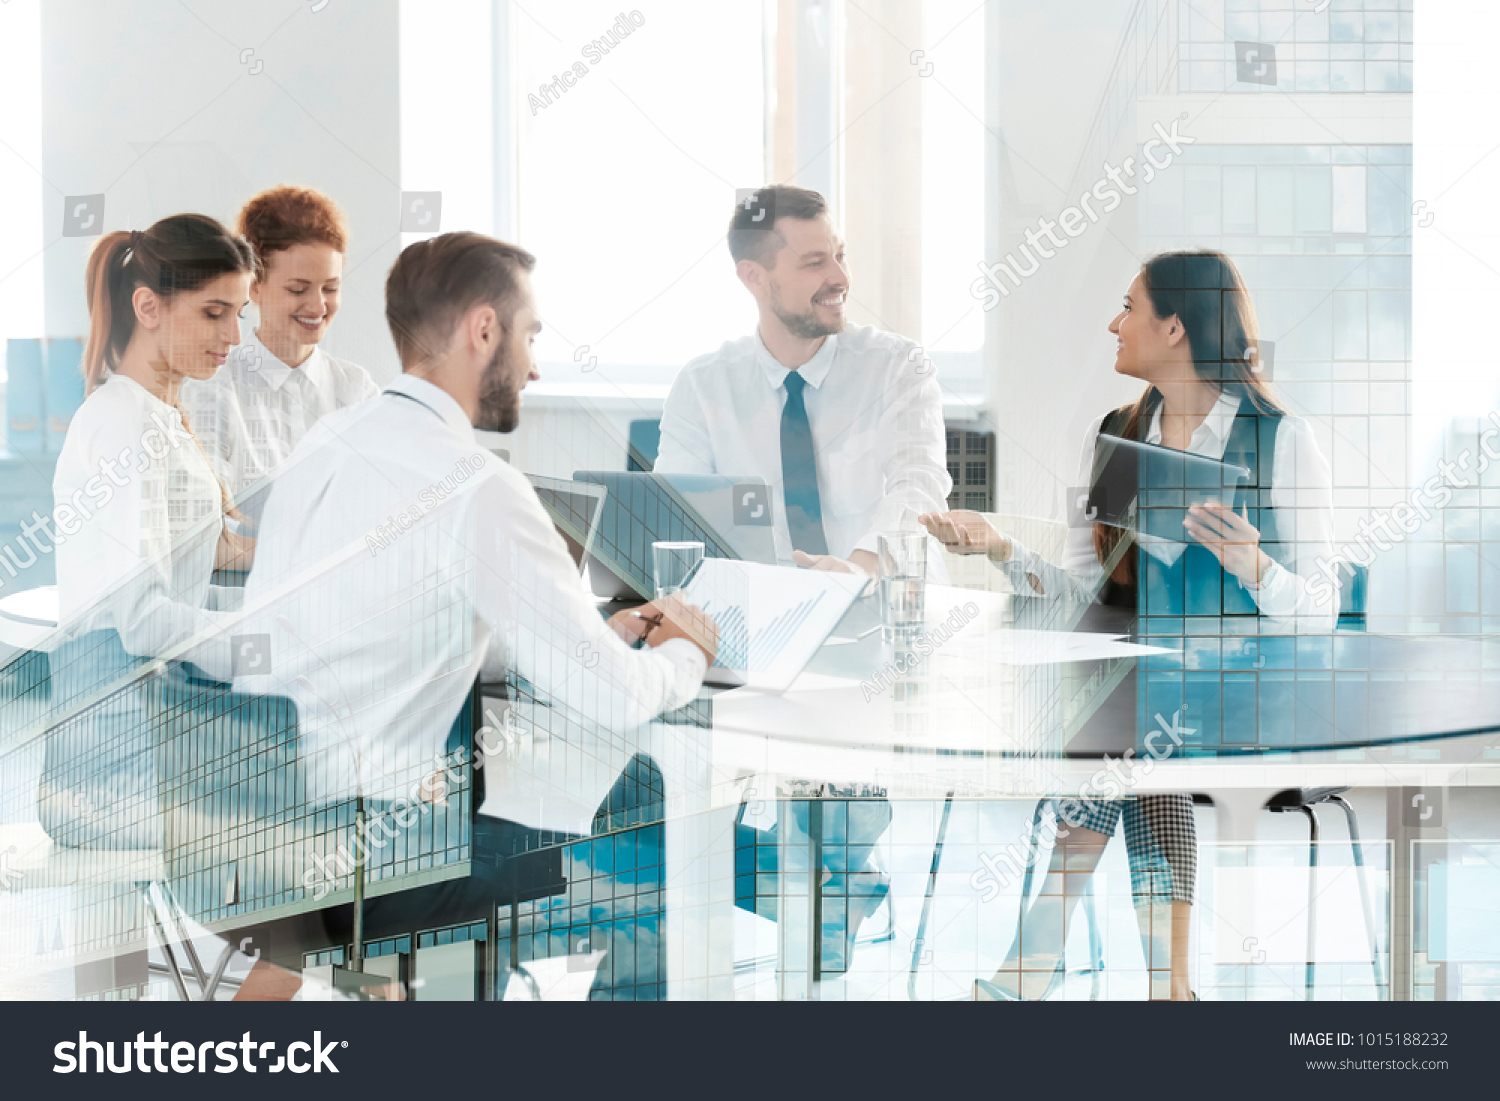 Double exposure of cityscape view and people working at table in office. Concept of financial trading #1015188232